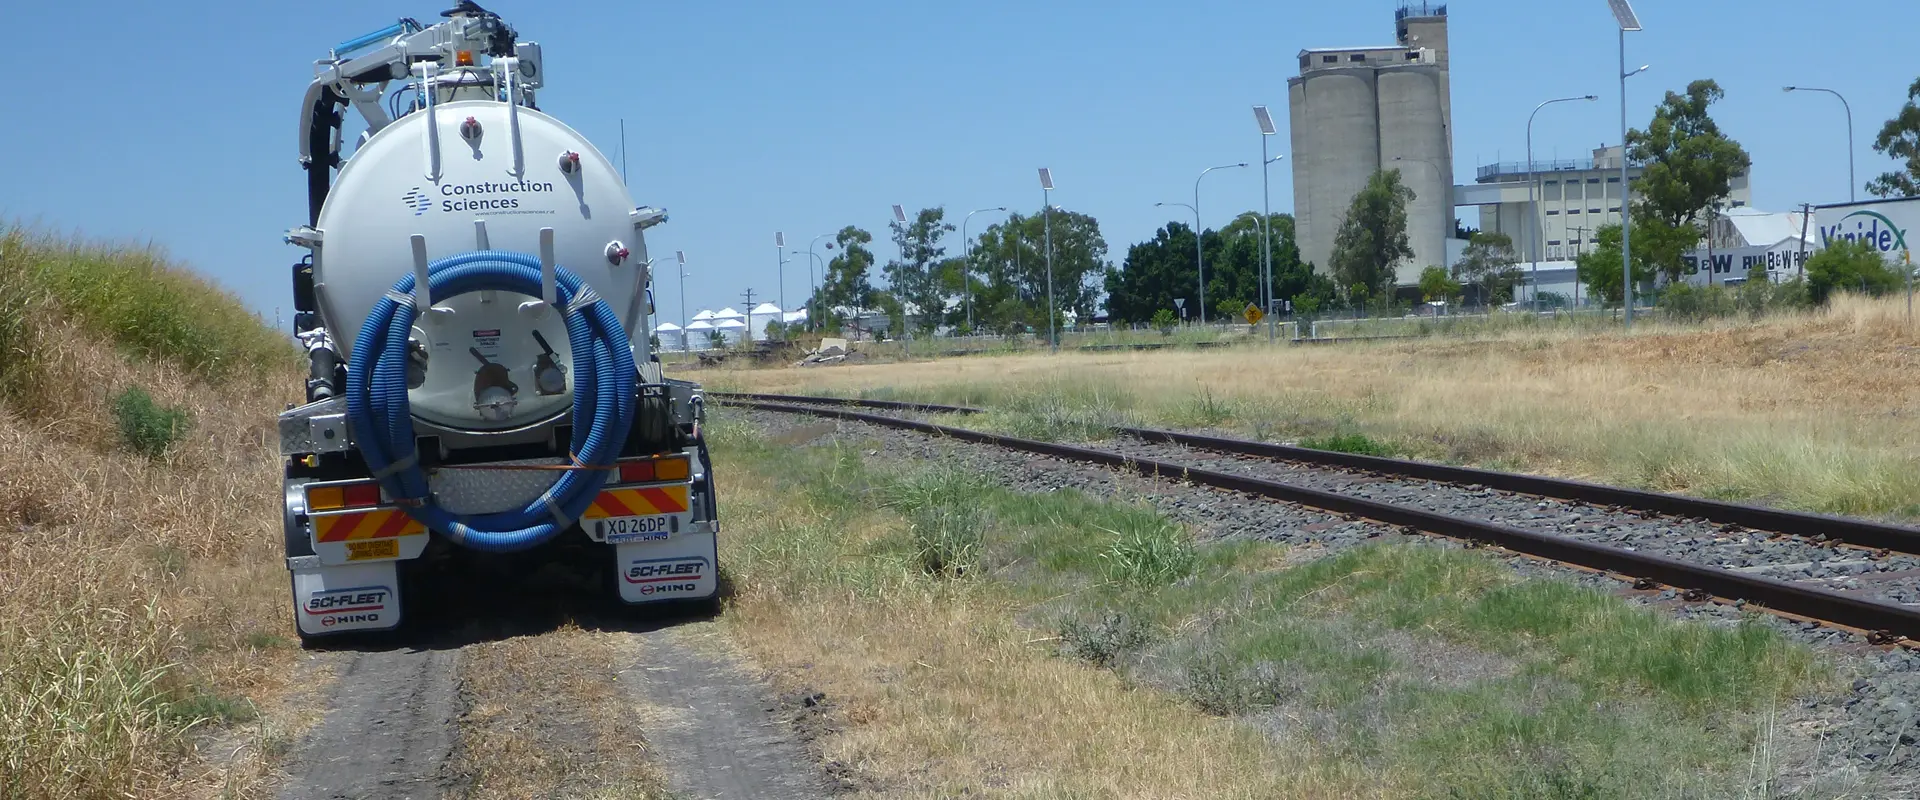 a construction sciences inland rail project